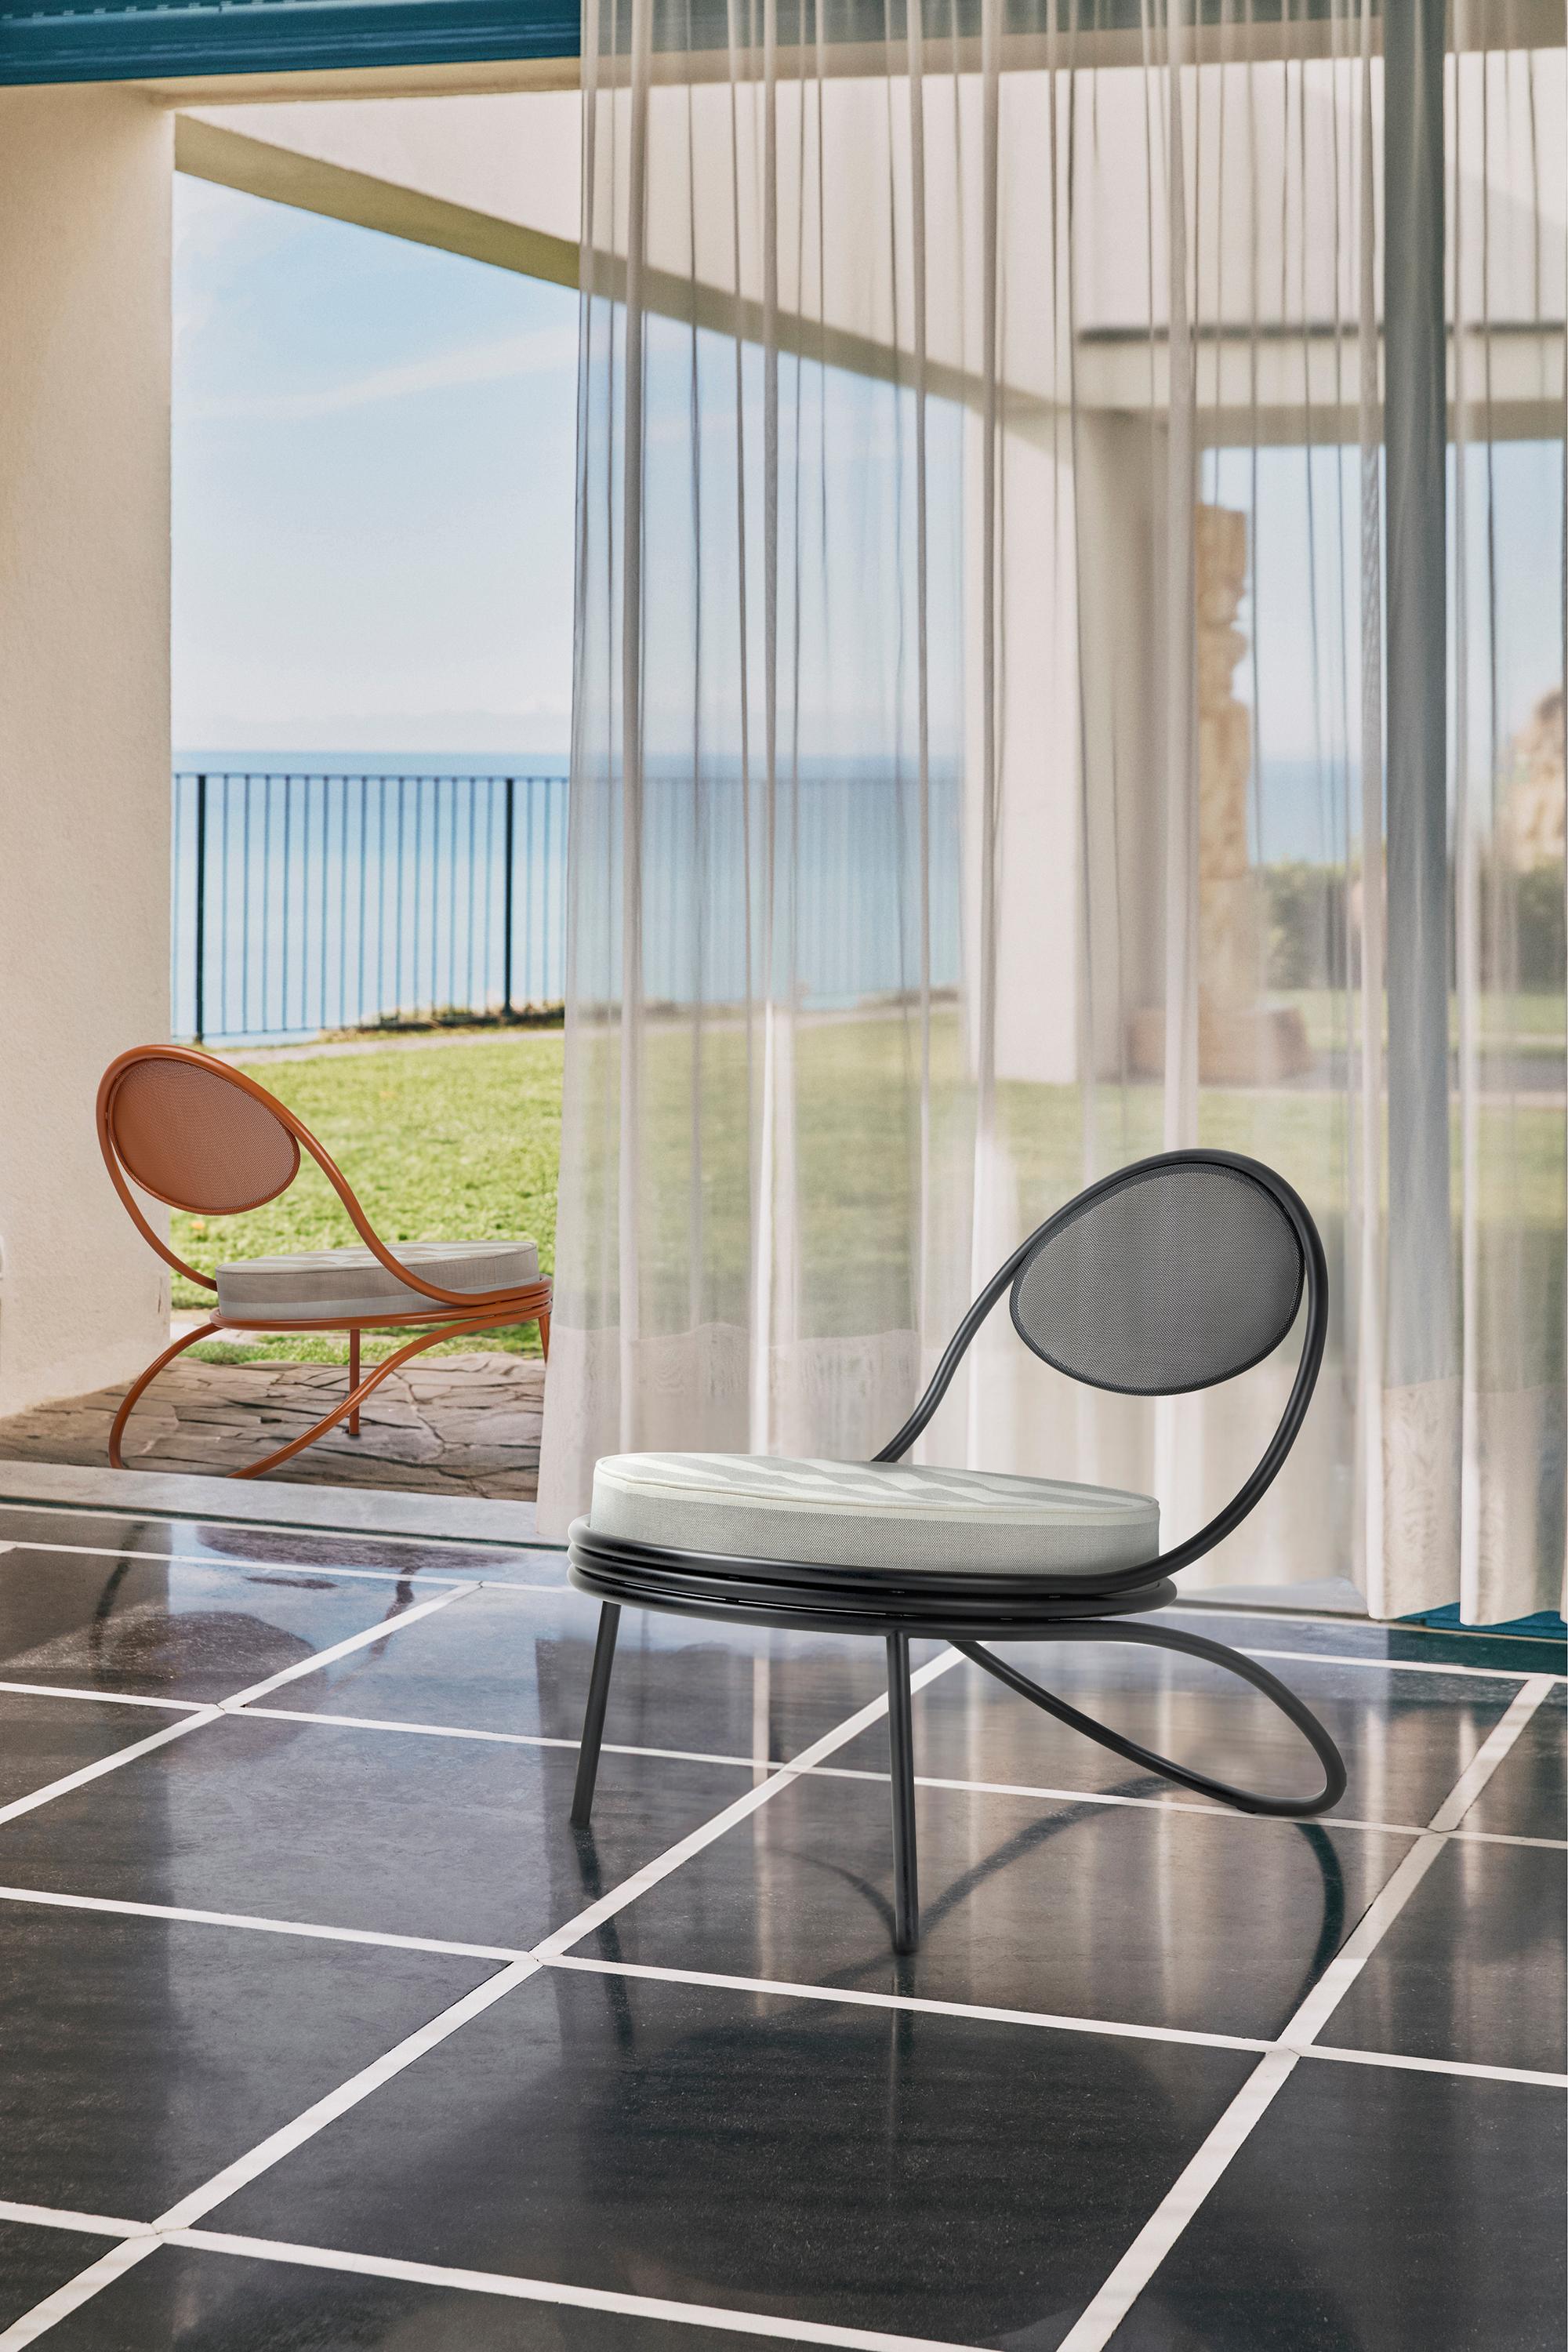 'Copacabana' Indoor Outdoor Lounge Chair by Mathieu Matégot in Leslie Fabric

A versatile, independent, and self-taught Hungarian designer, architect and artist, Mathieu Matégot (1910–2001) first learned about the techniques and potential of sheet